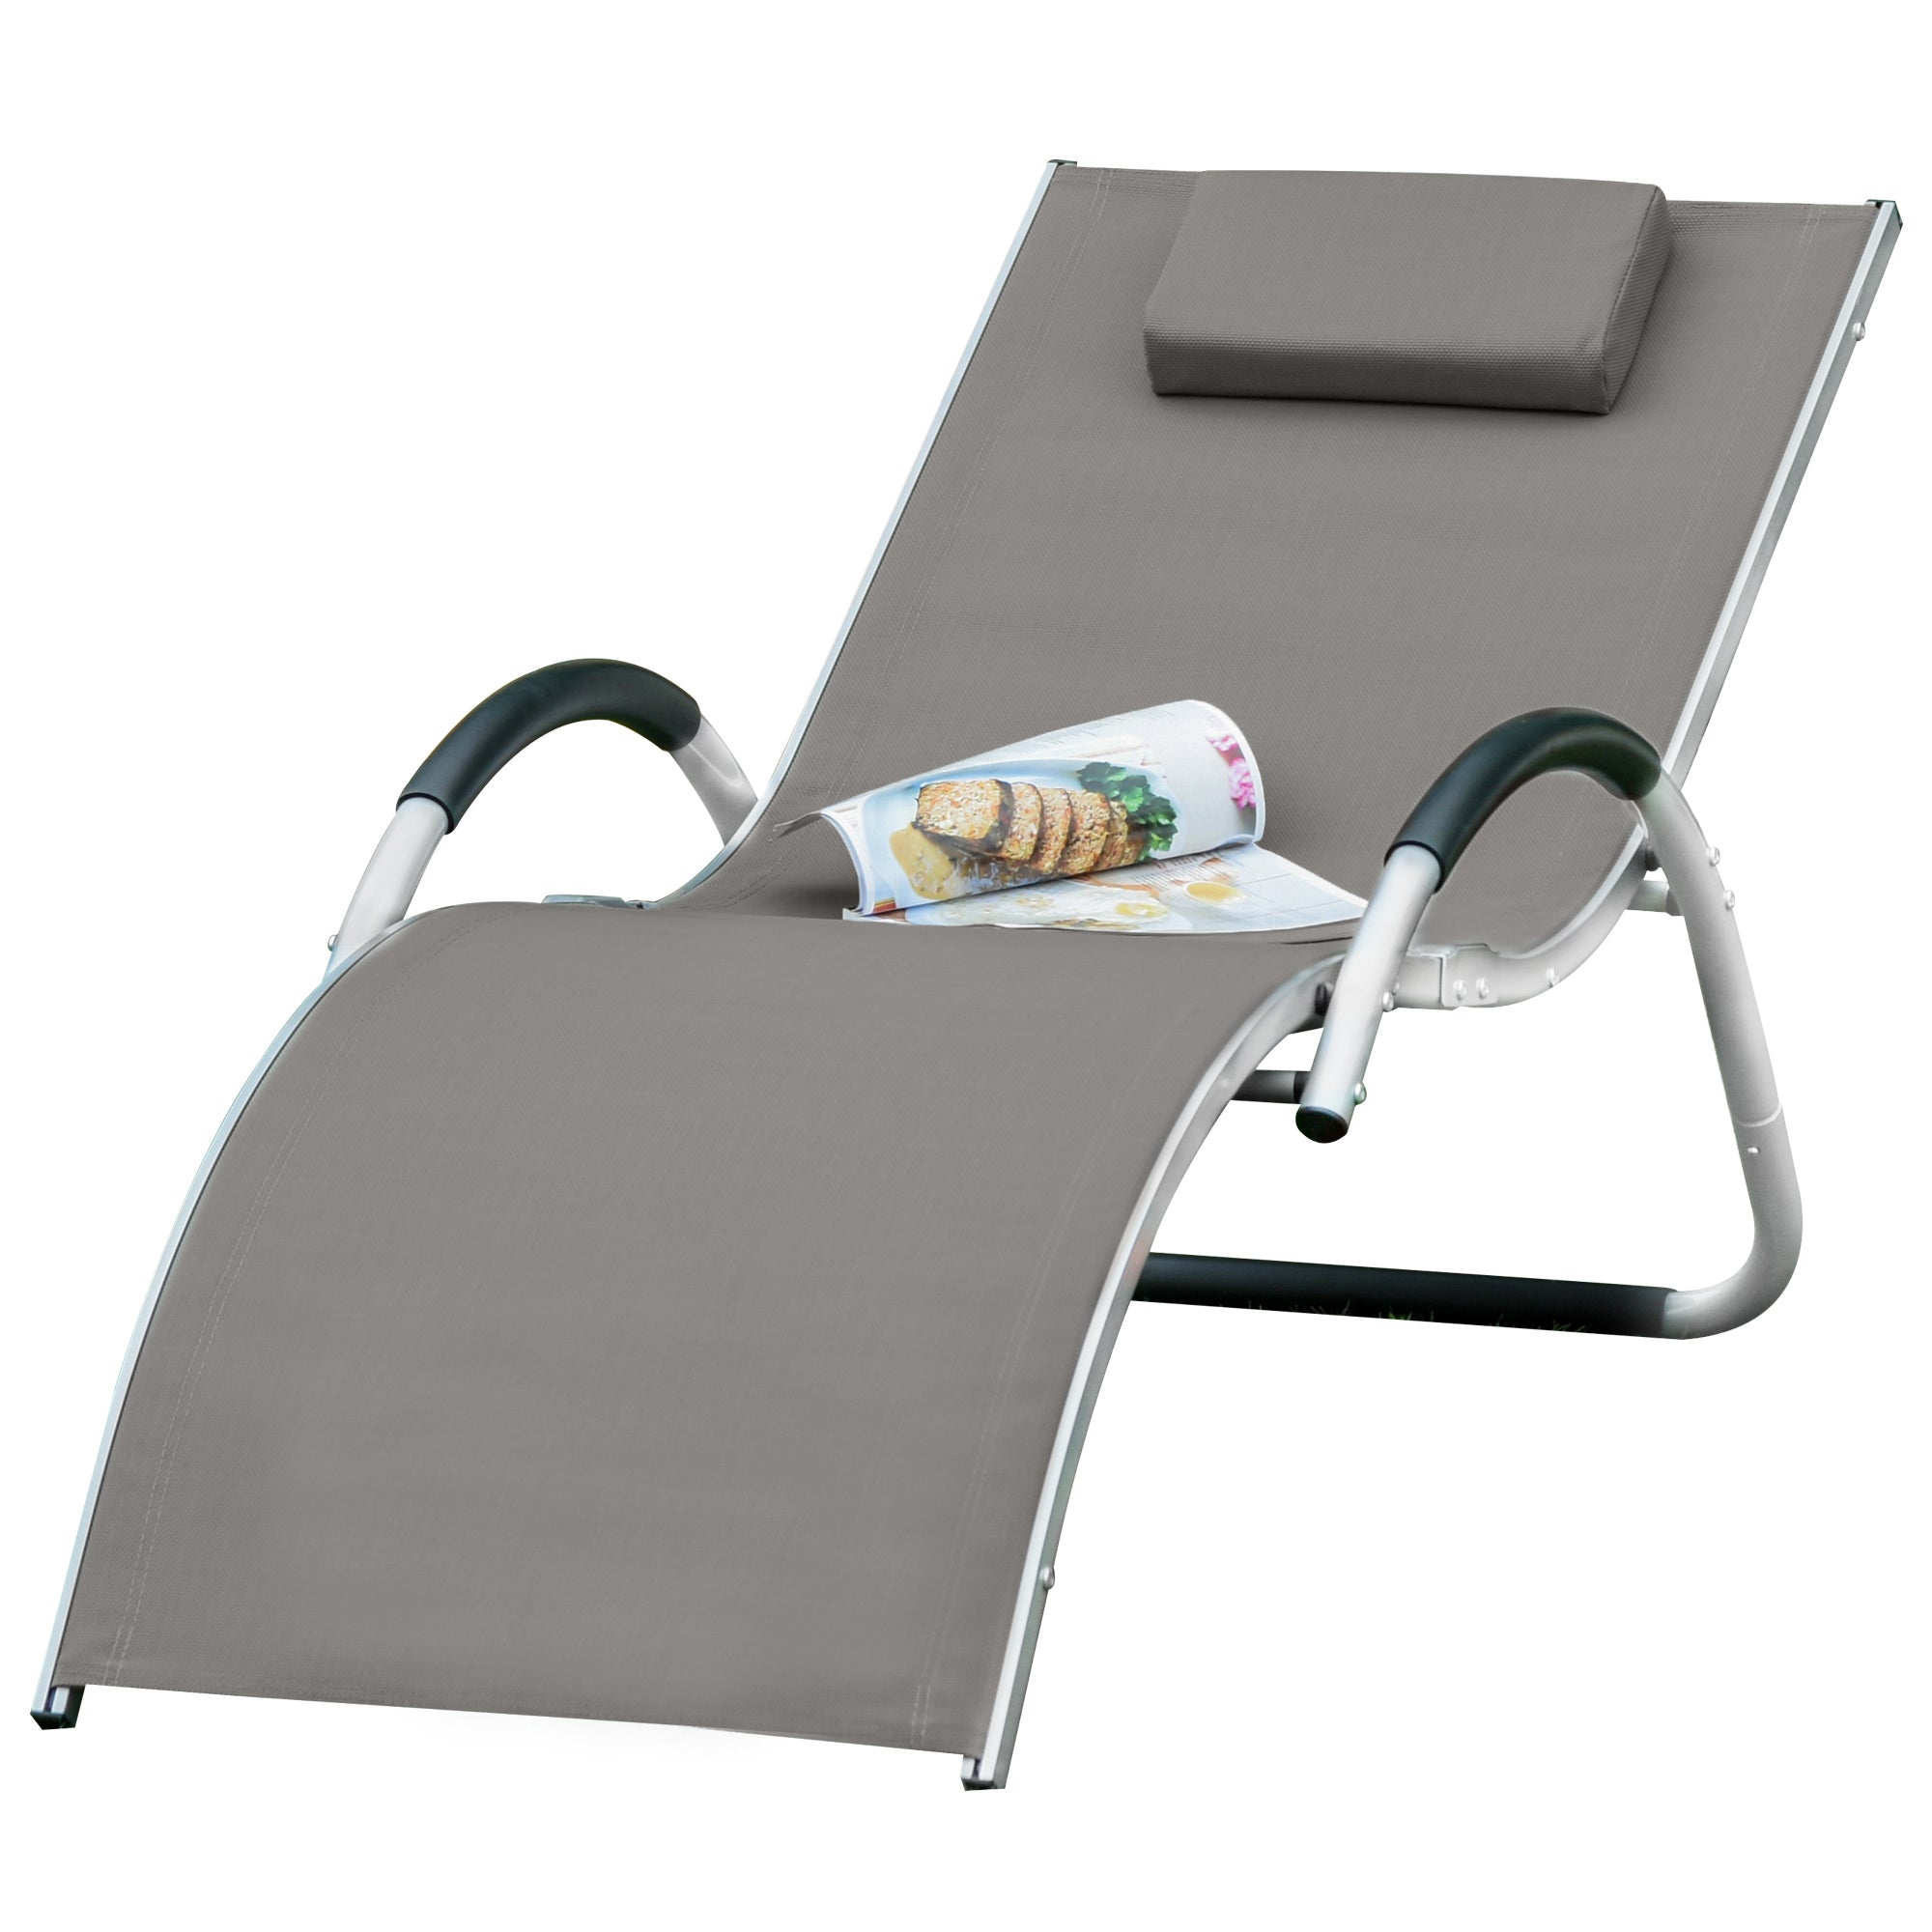 Outsunny Ergonomic Lounger Chair Portable Armchair with Removable Headrest Pillow for Garden Patio Outside All Aluminium Frame Khaki - Inspirely